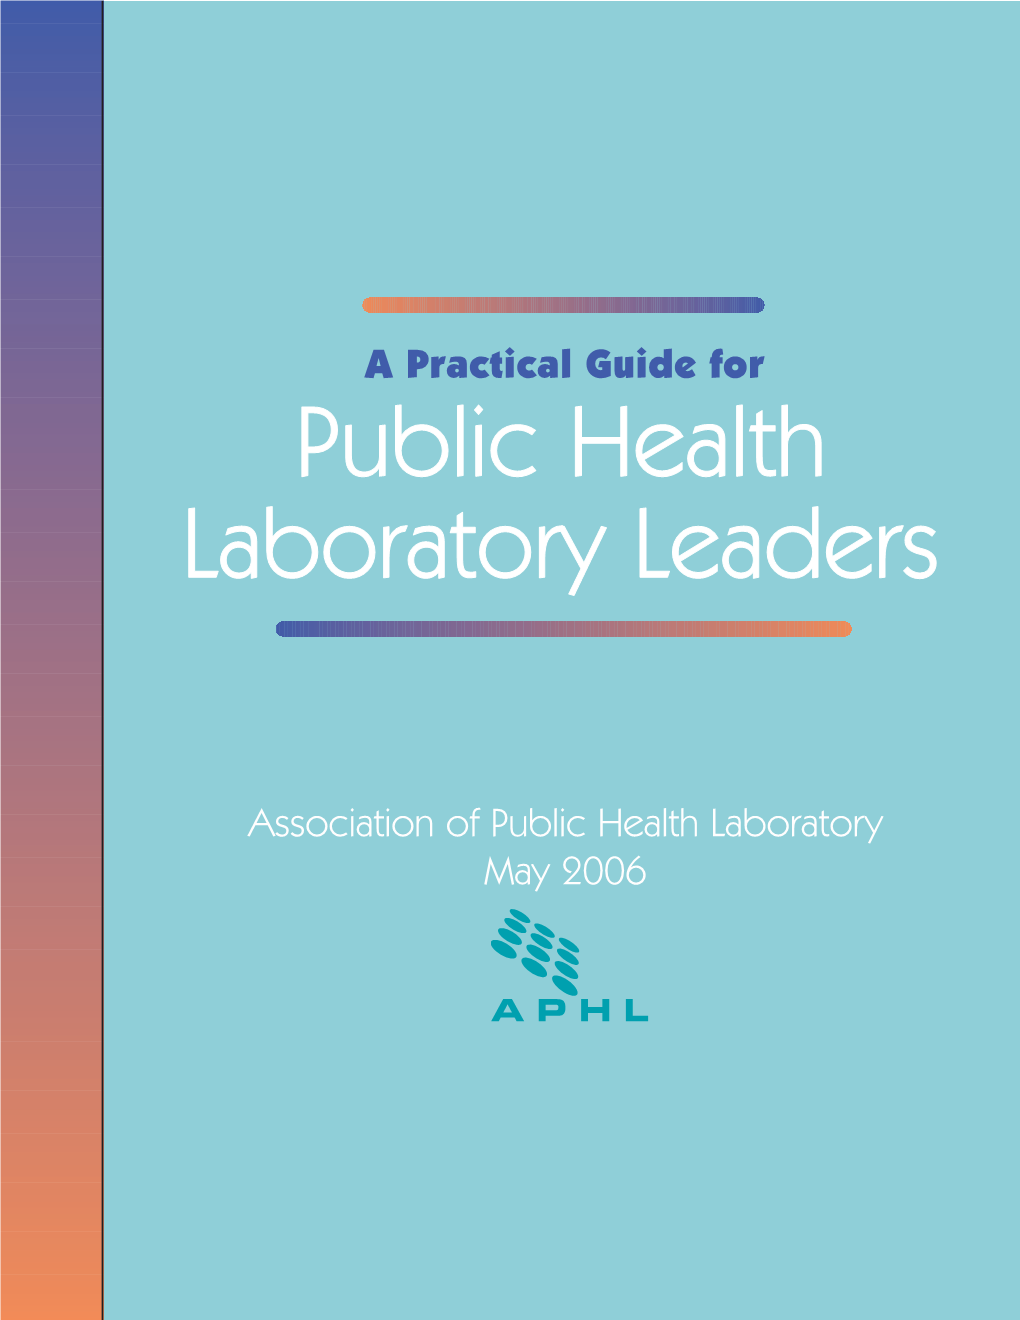 A Practical Guide for Public Health Laboratory Leaders